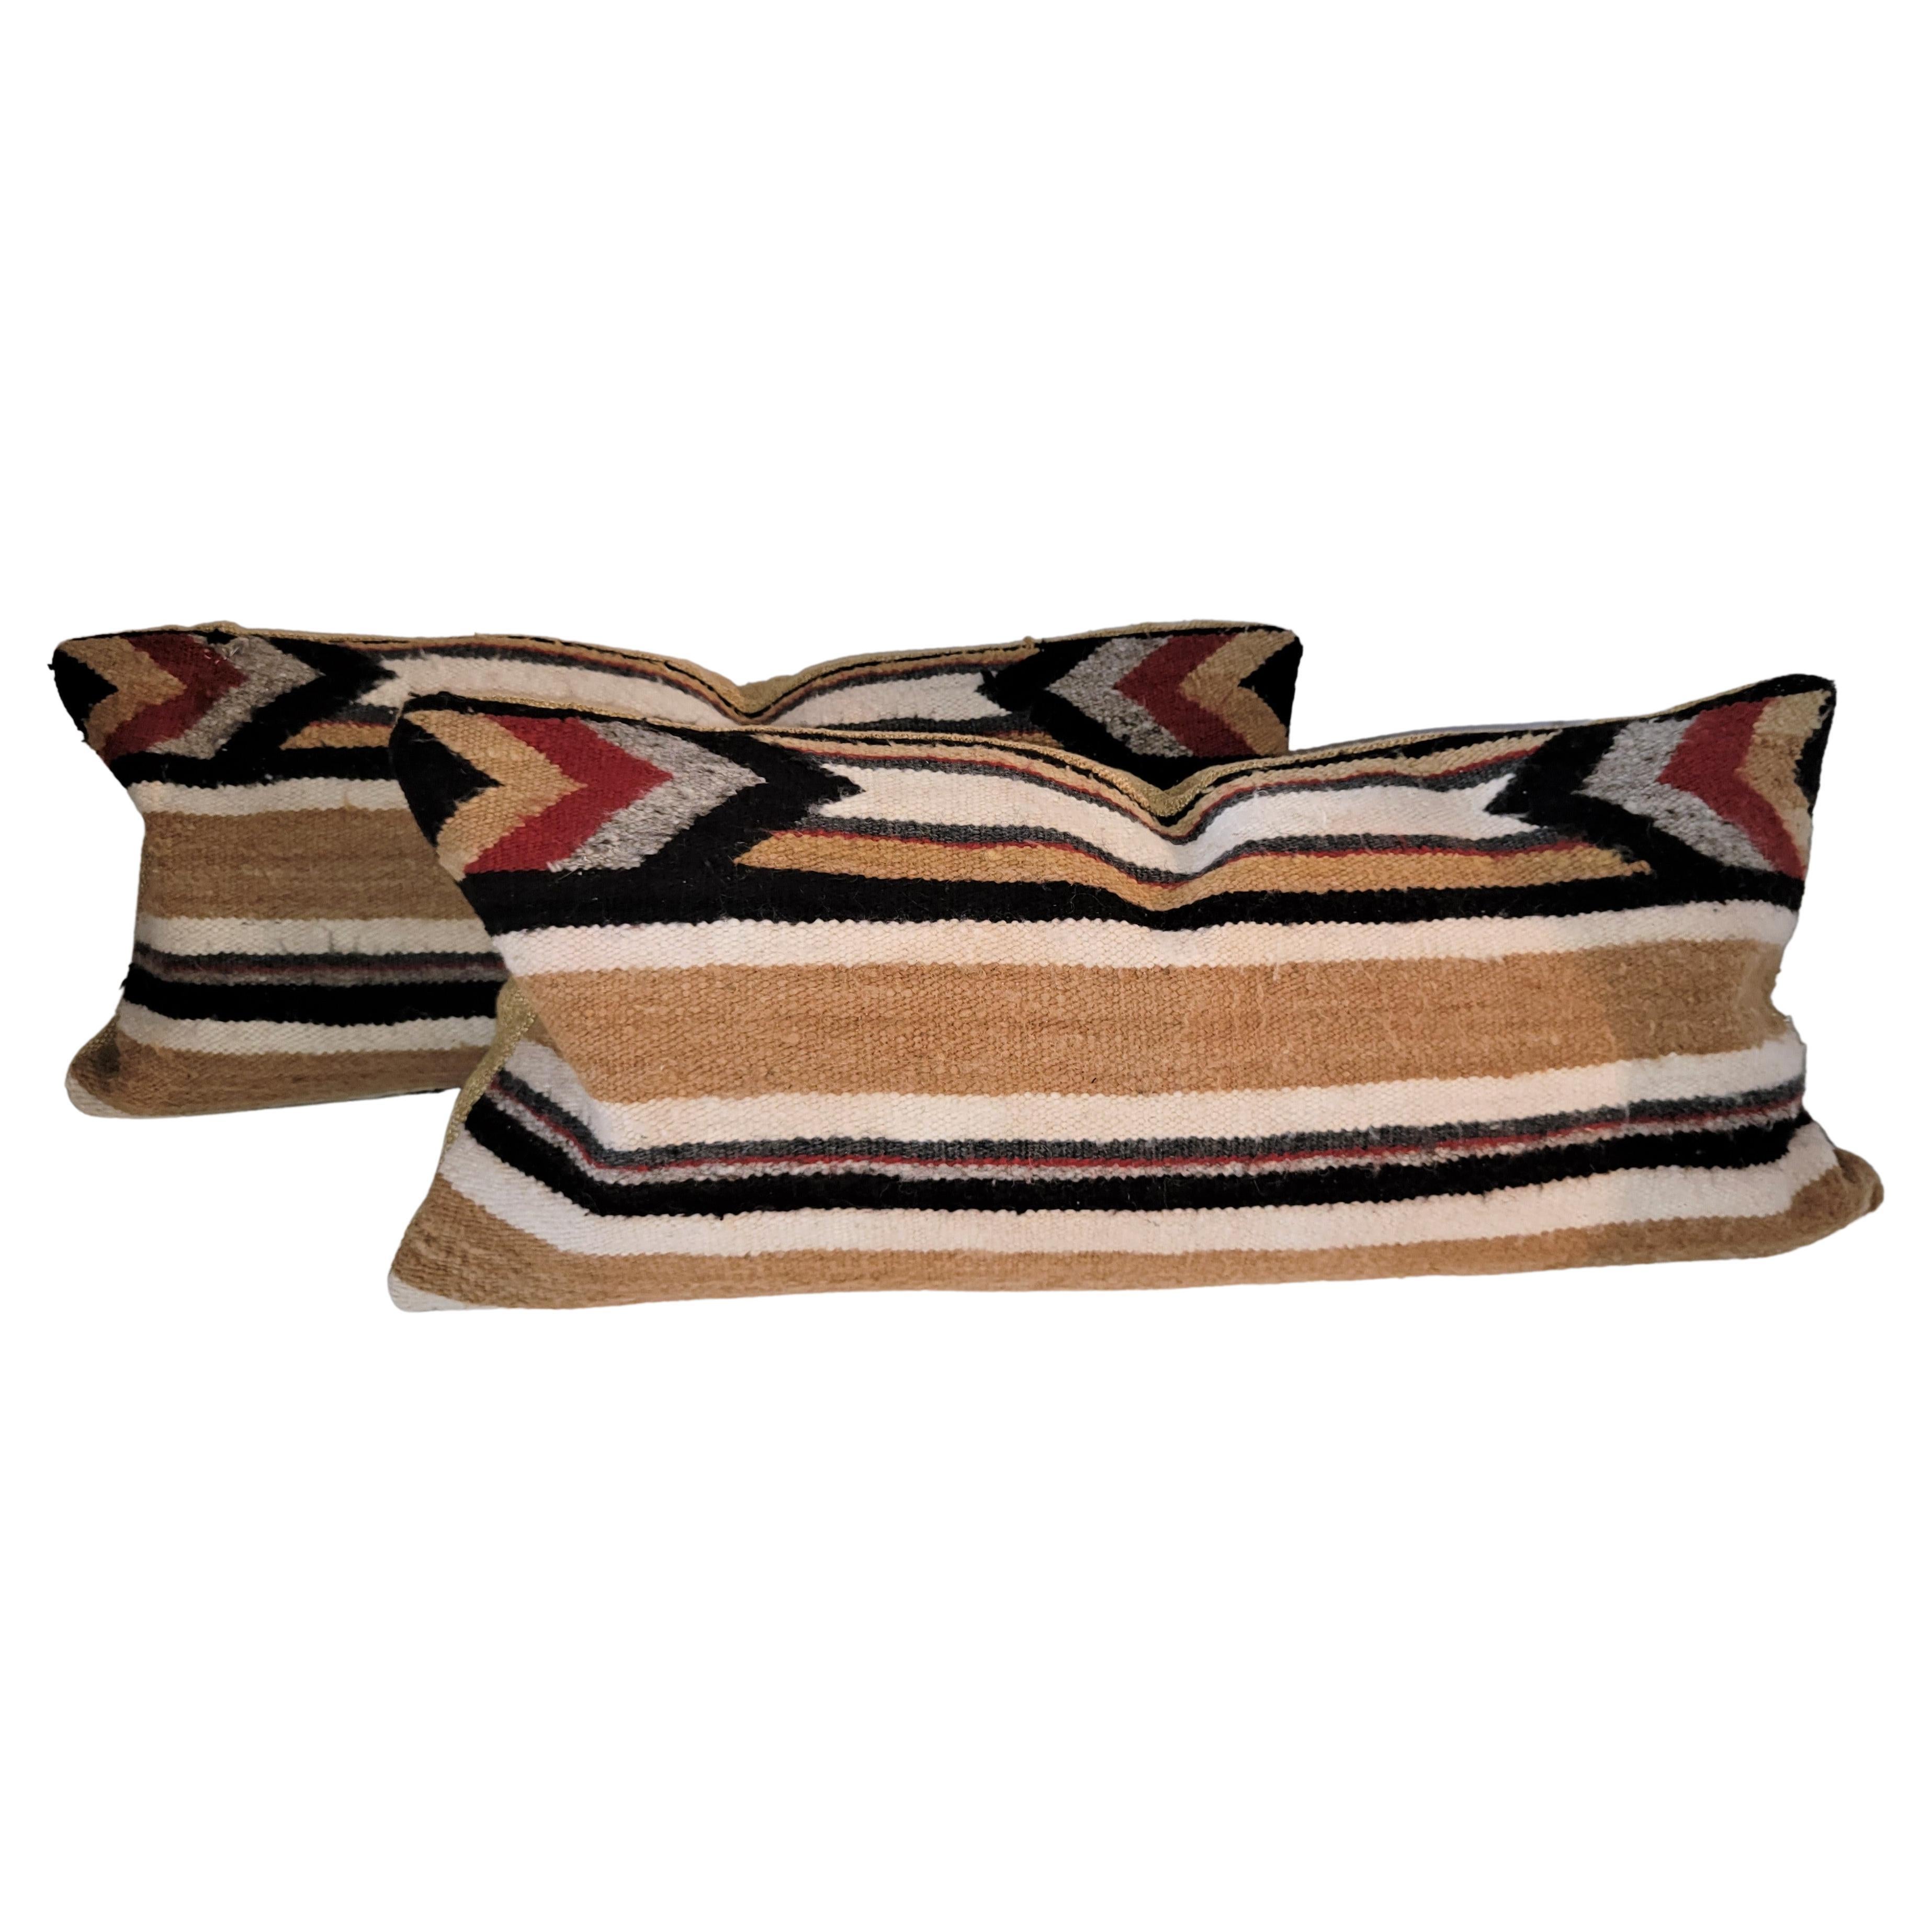 Pair of Navajo Indian Weaving Pillows with a Geometric Pattern